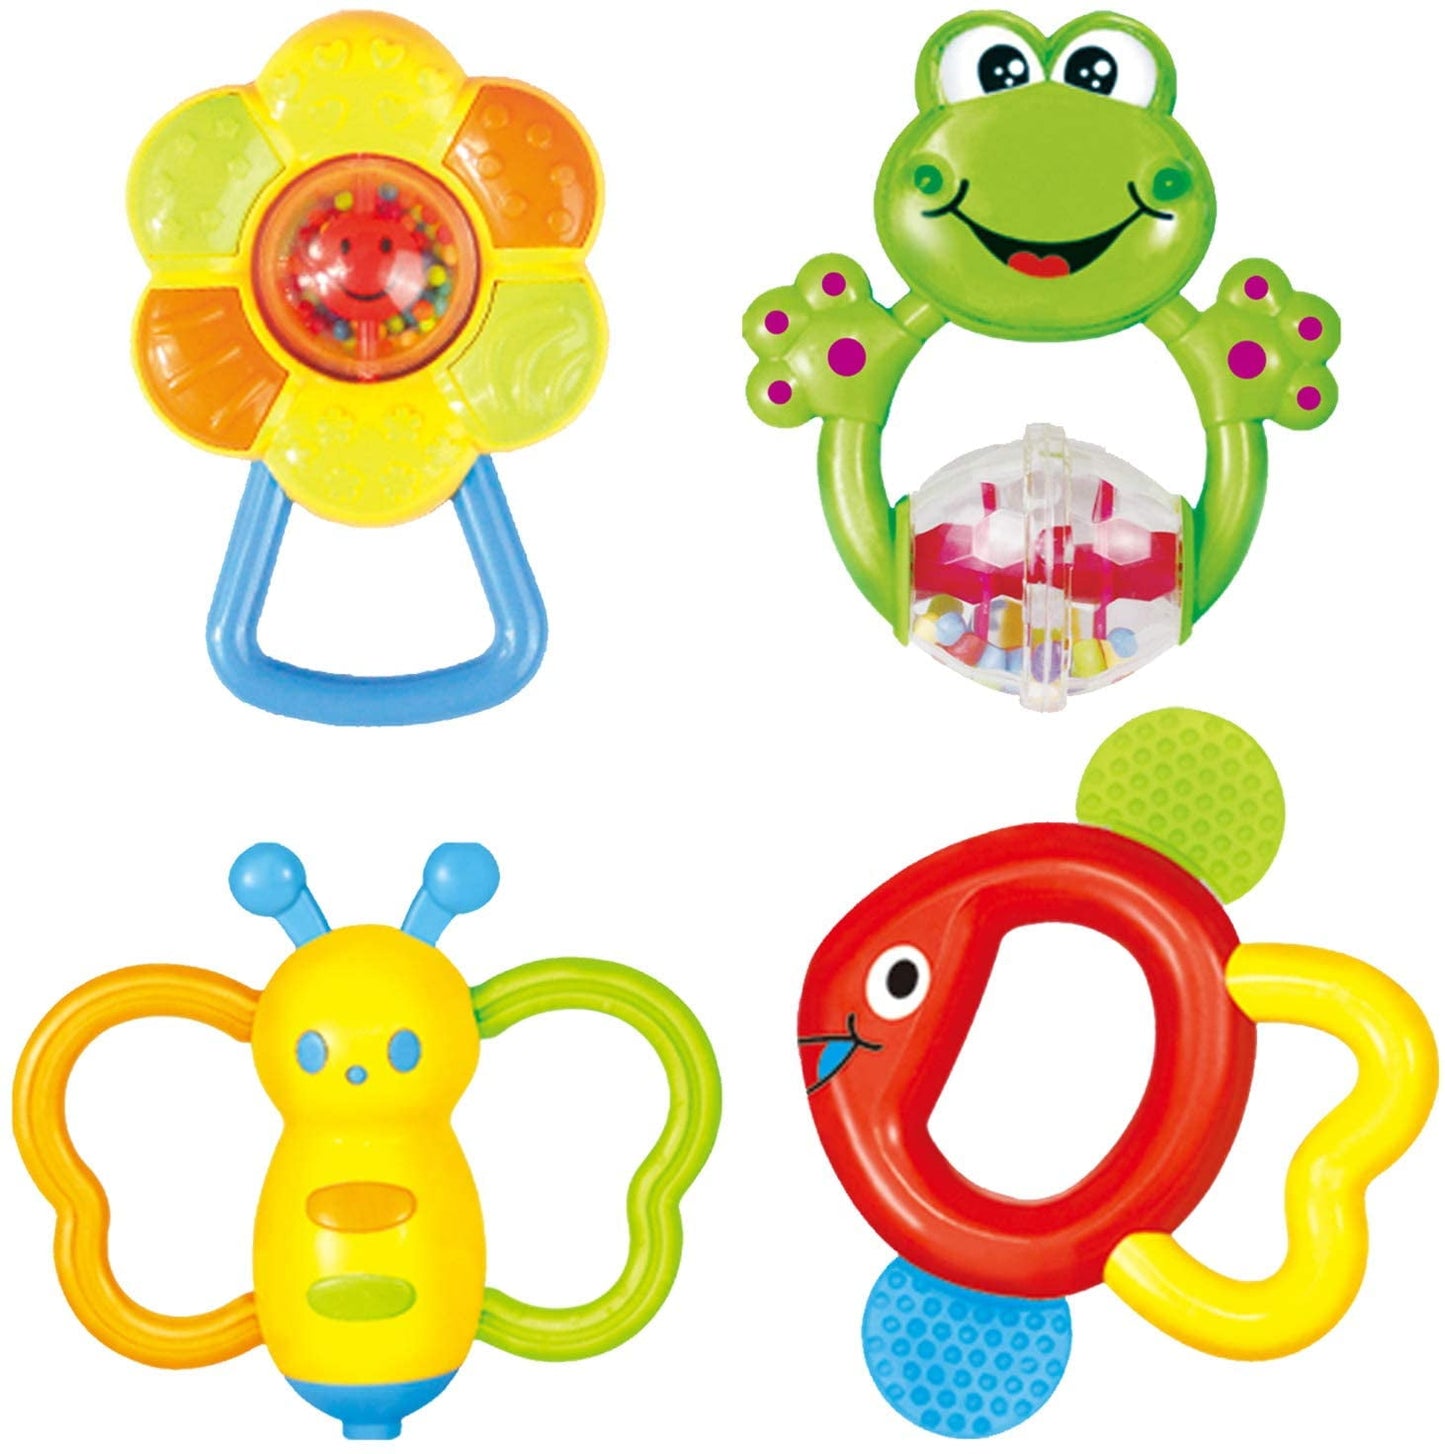 DDB95 BABY RATTLE (4 PIECES)